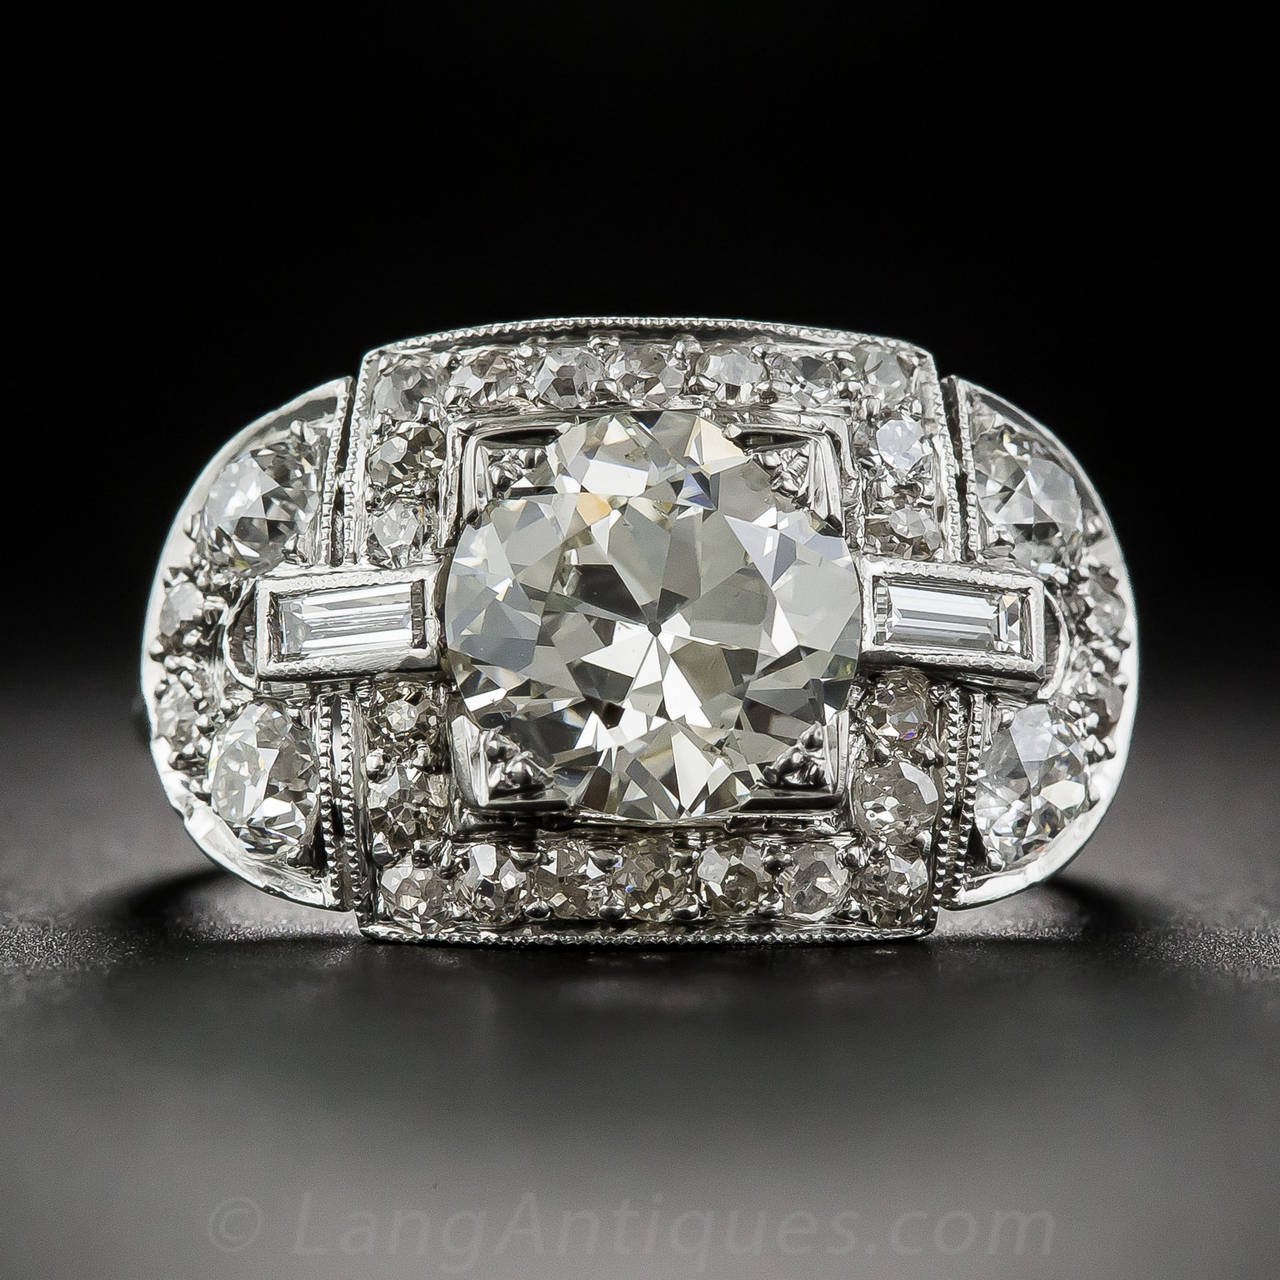 This remarkable, show stopping Art Deco ring dates to the Jazz Age in the Roaring '20s.The ring is hand crafted in luxurious platinum, sporting a comfortable, narrow shank, leading to the ring's ornate, diamond-set crown. The crown features an